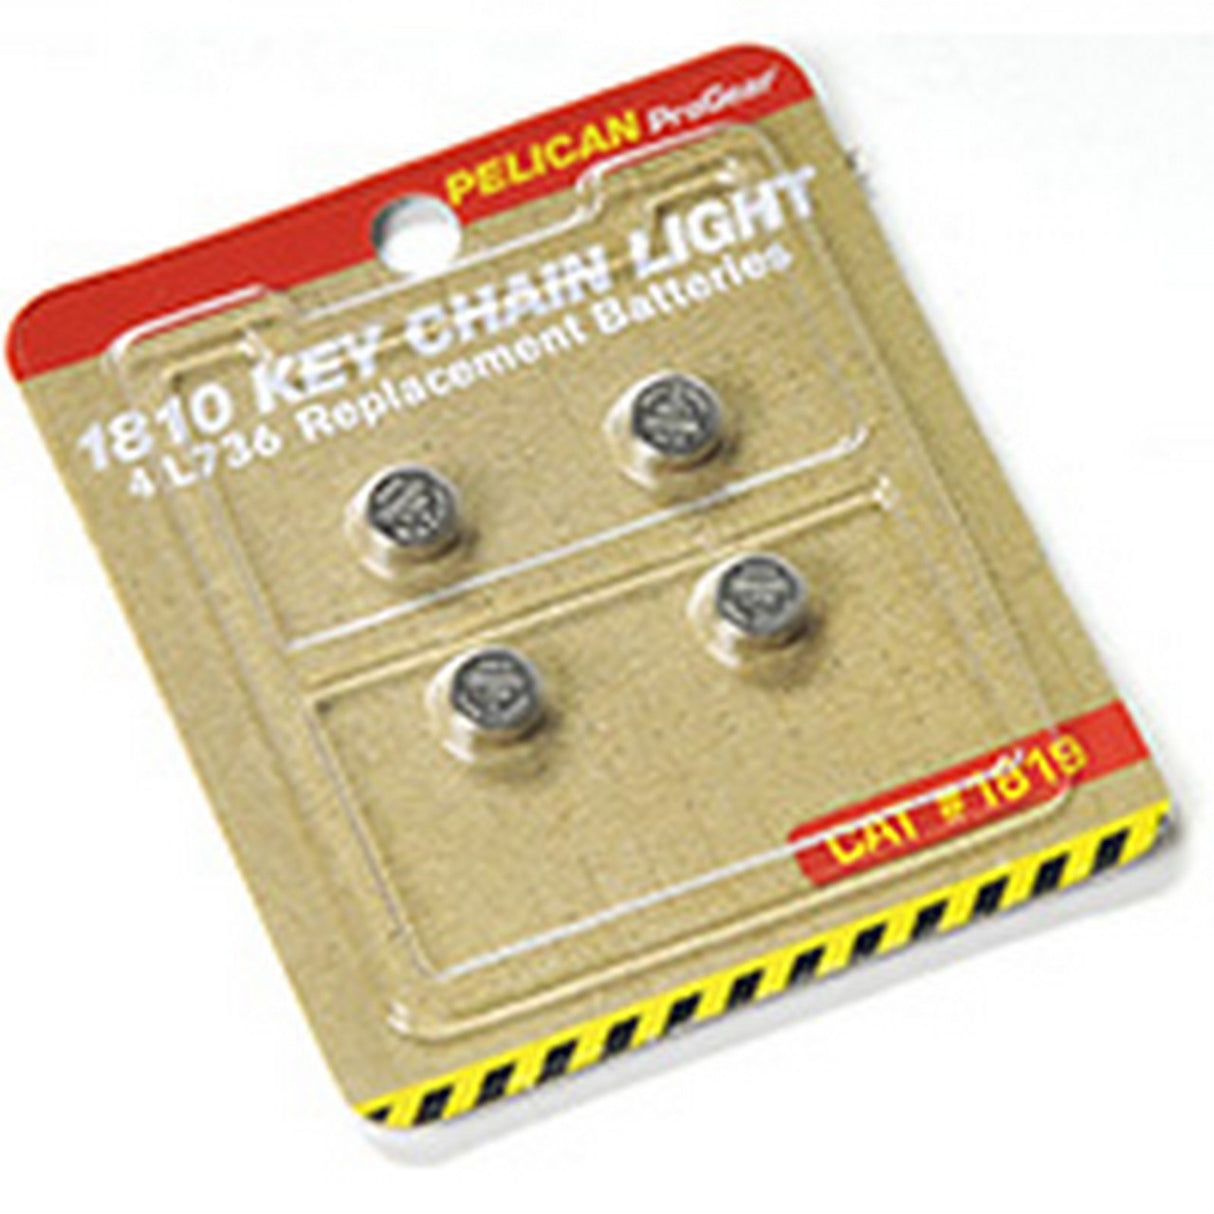 Pelican 1819 | 4 Pack Replacement Batteries for 1810 Flashlight